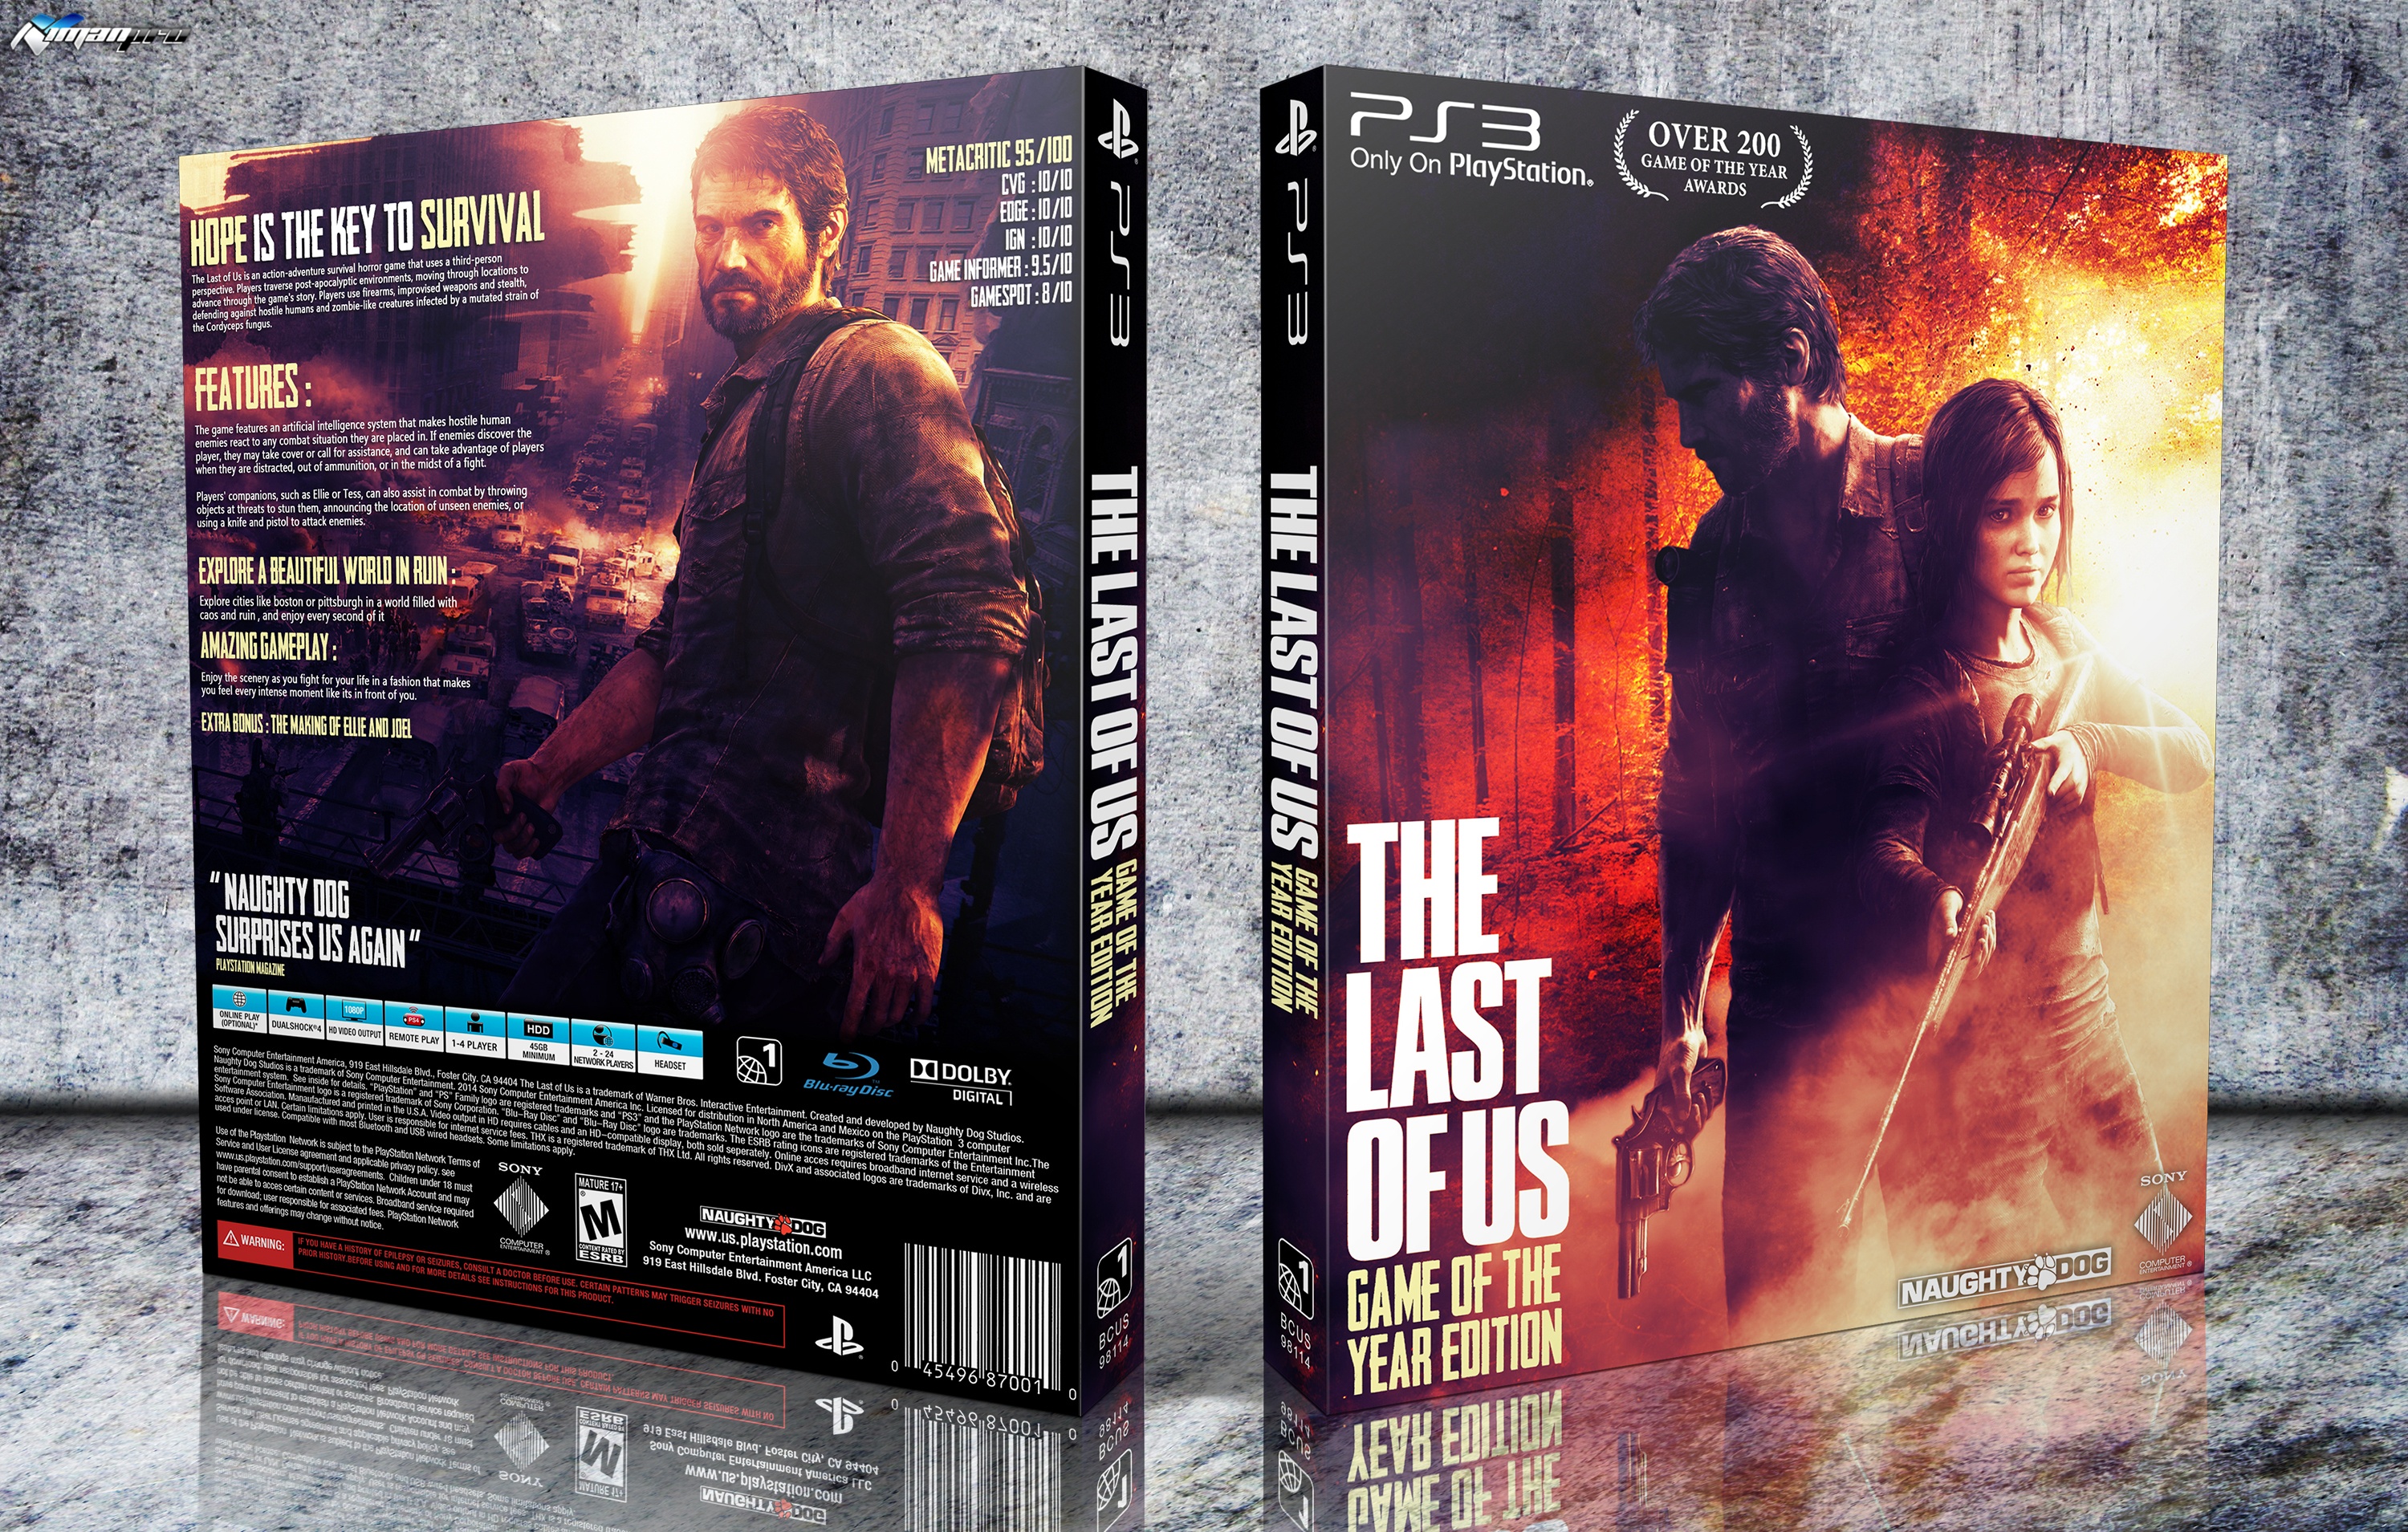 The Last of Us: Game of The Year Edition box cover